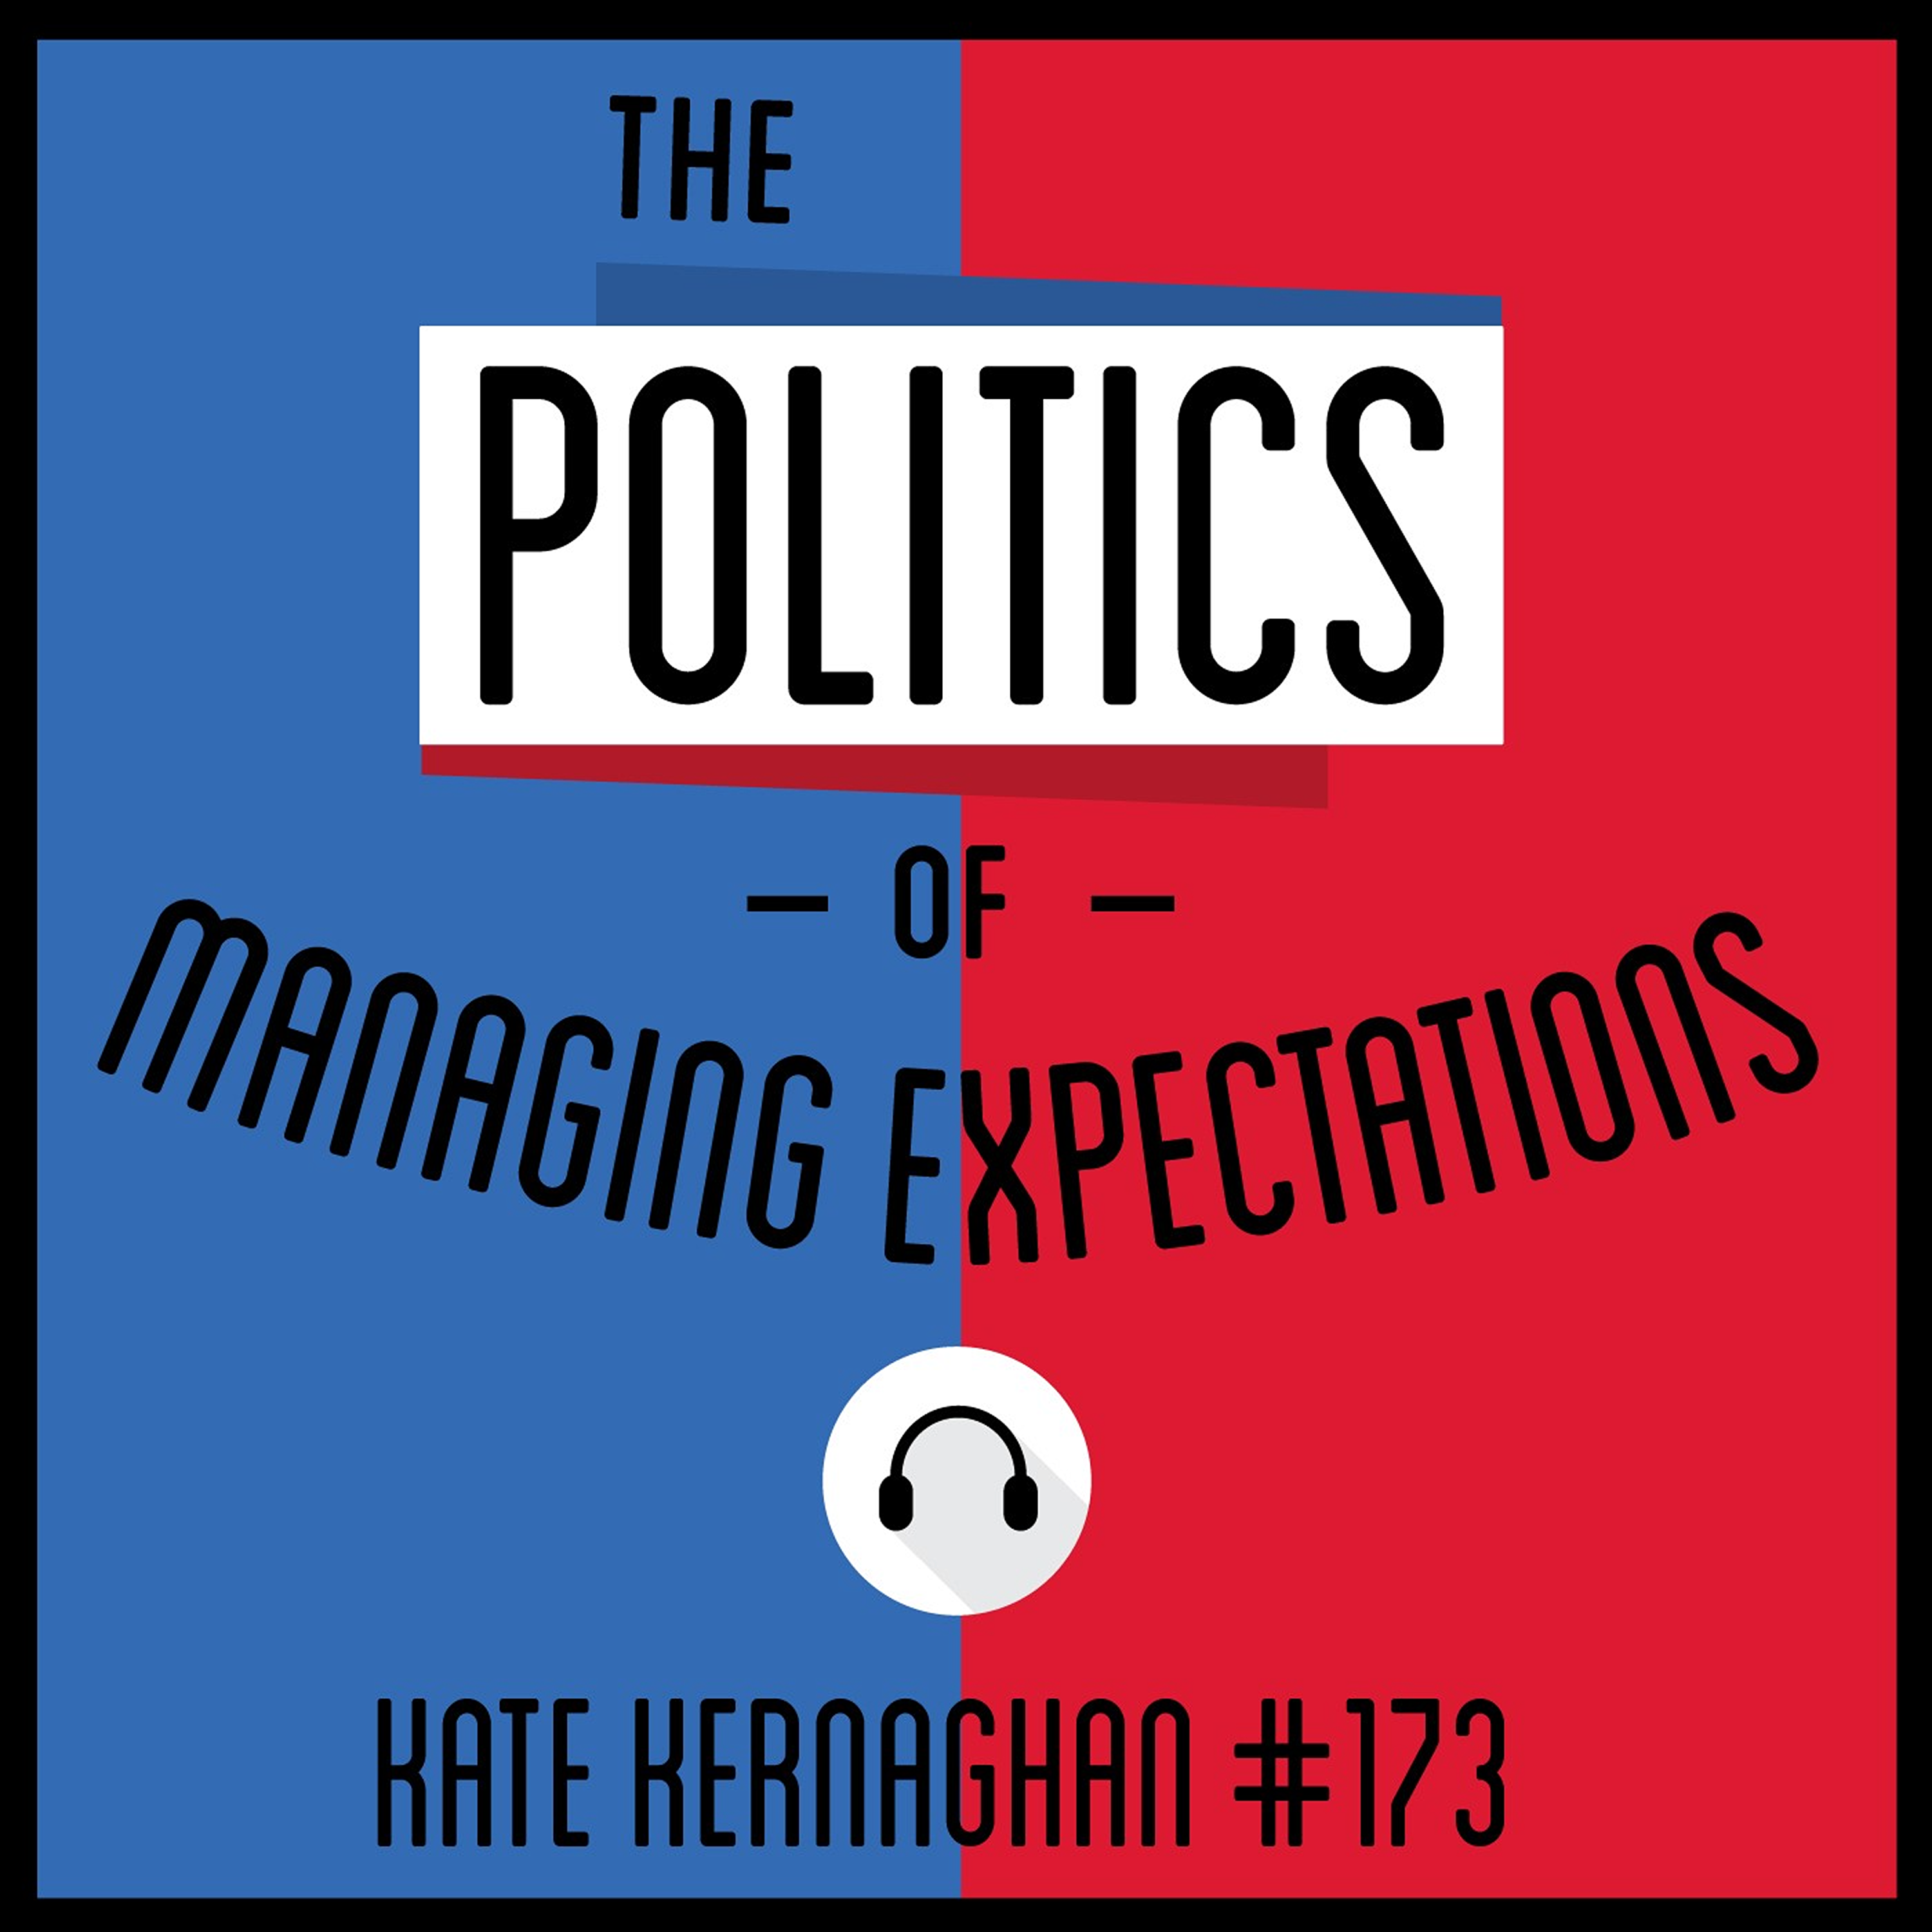 173: The Politics of Managing Expectations - Kate Kernaghan